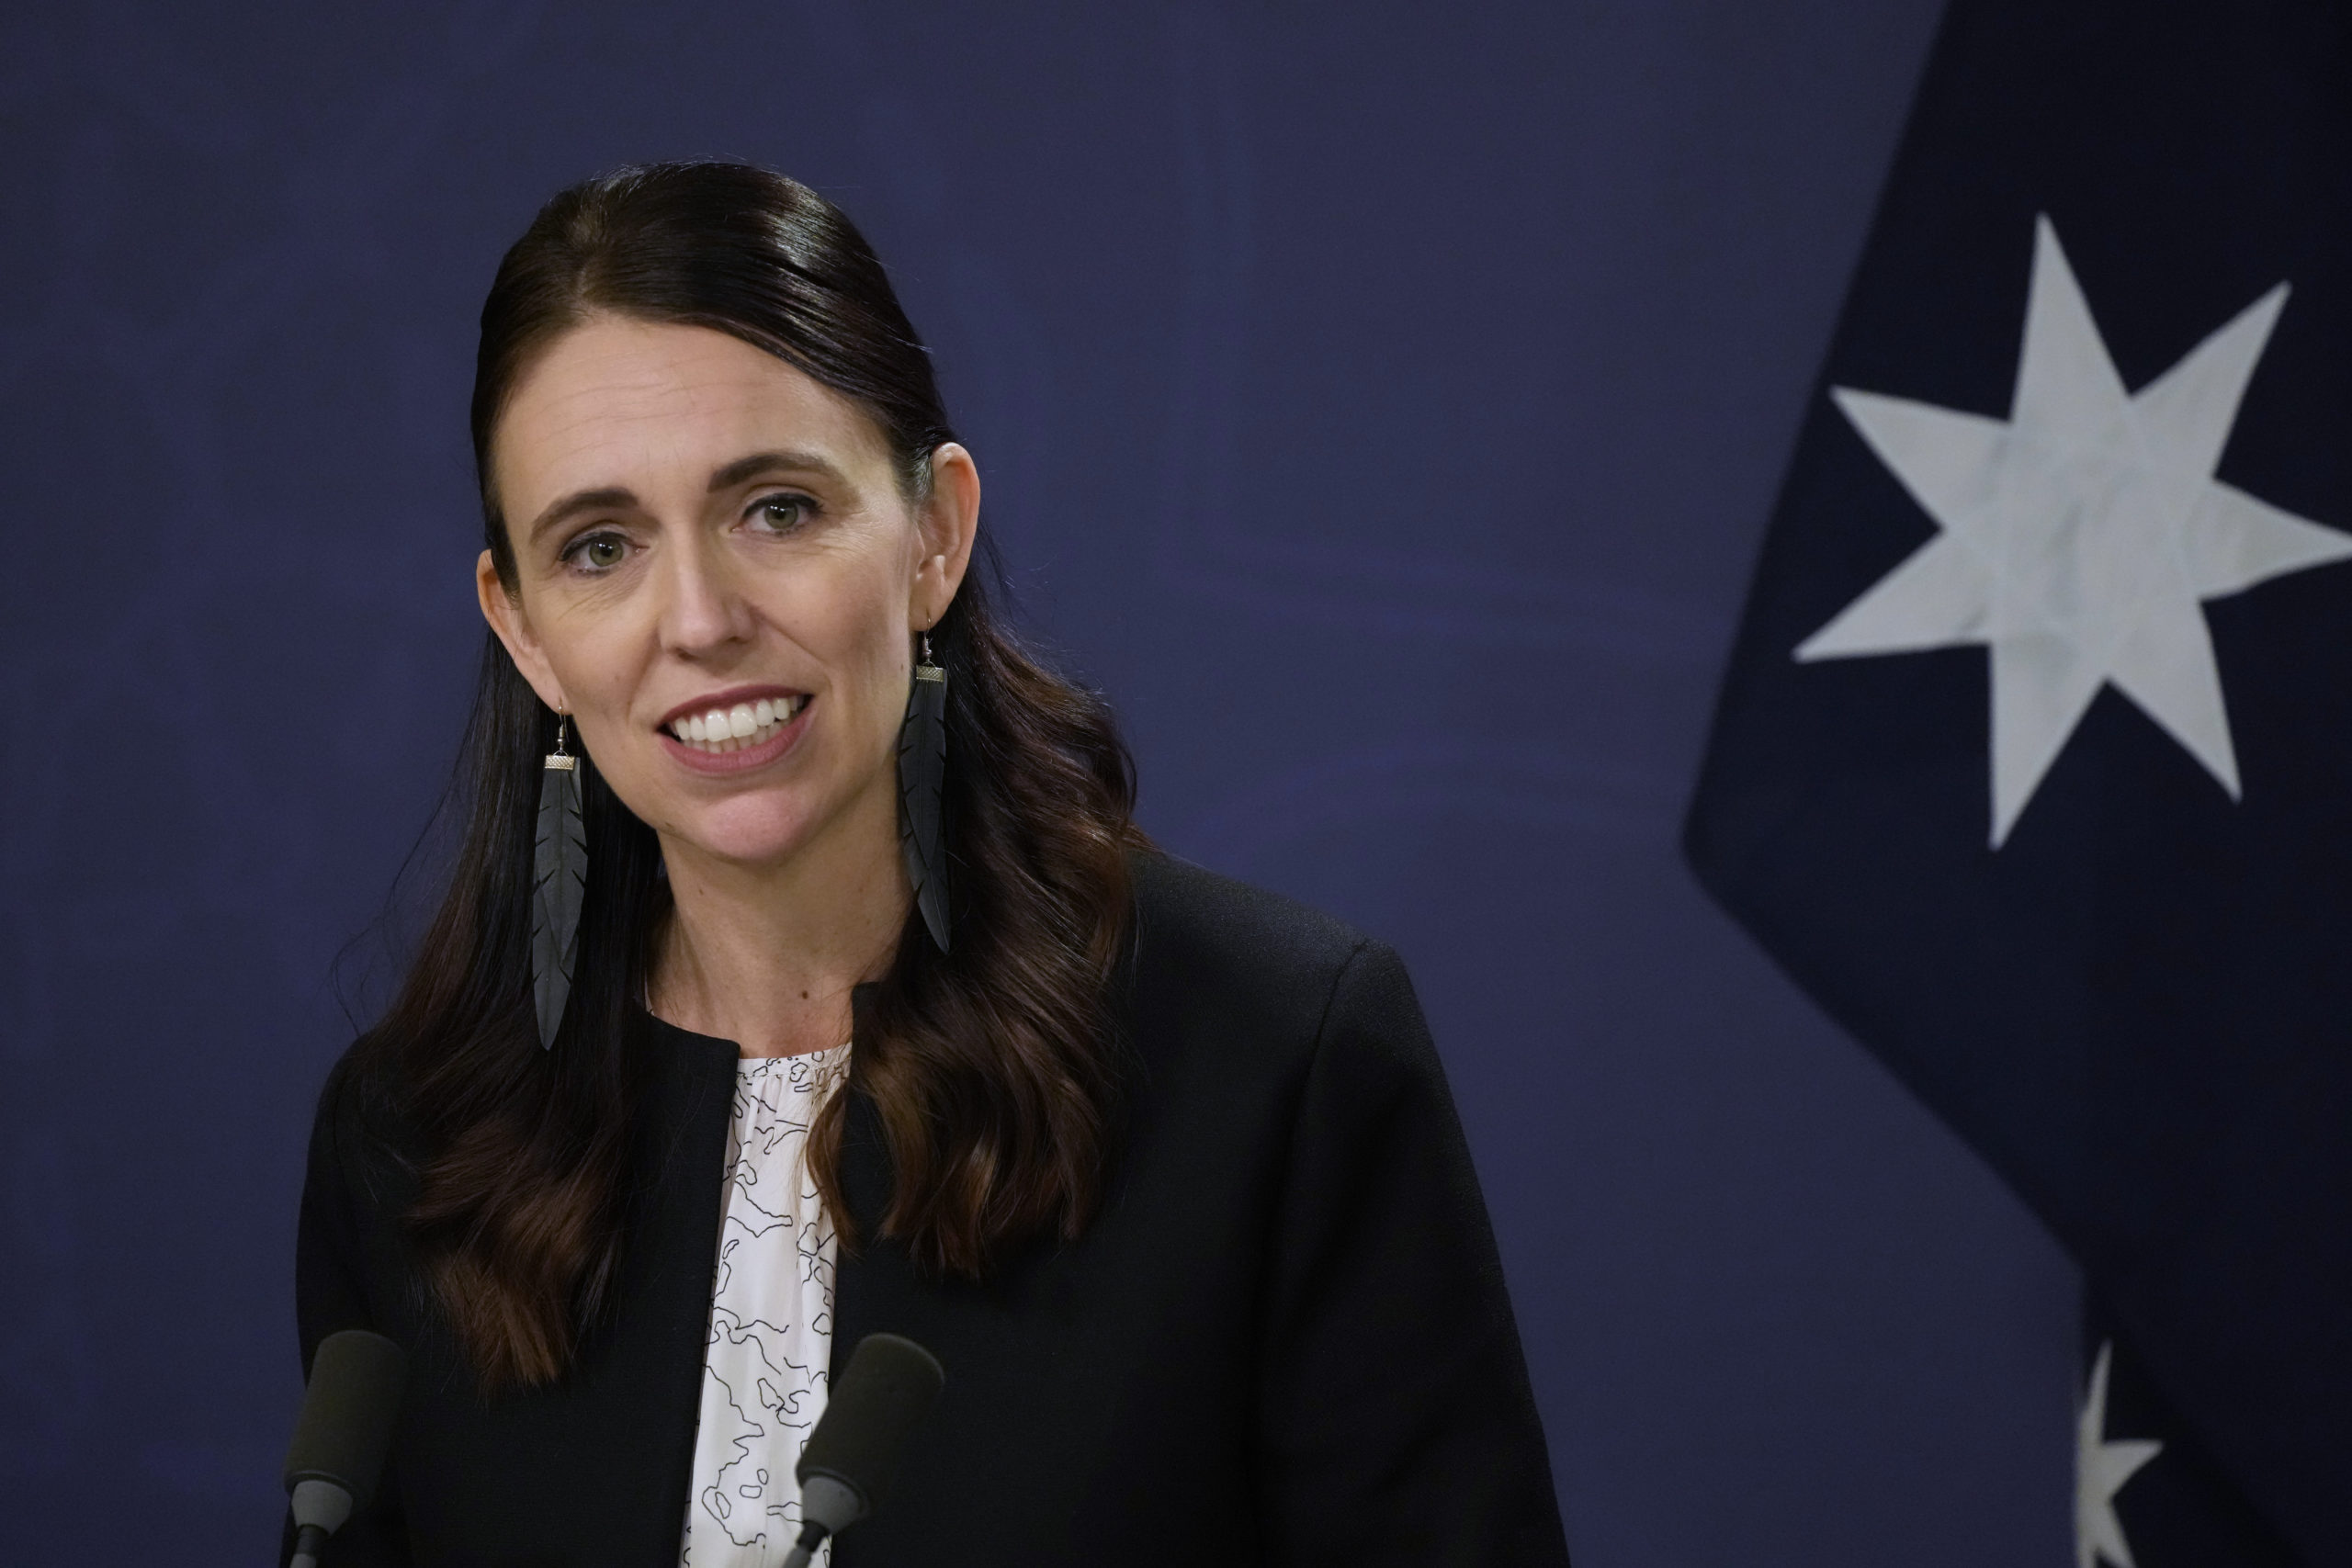 New Zealand Prime Minister Jacinda Ardern was caught on a hot mic Tuesday using a vulgarity against a rival politician.